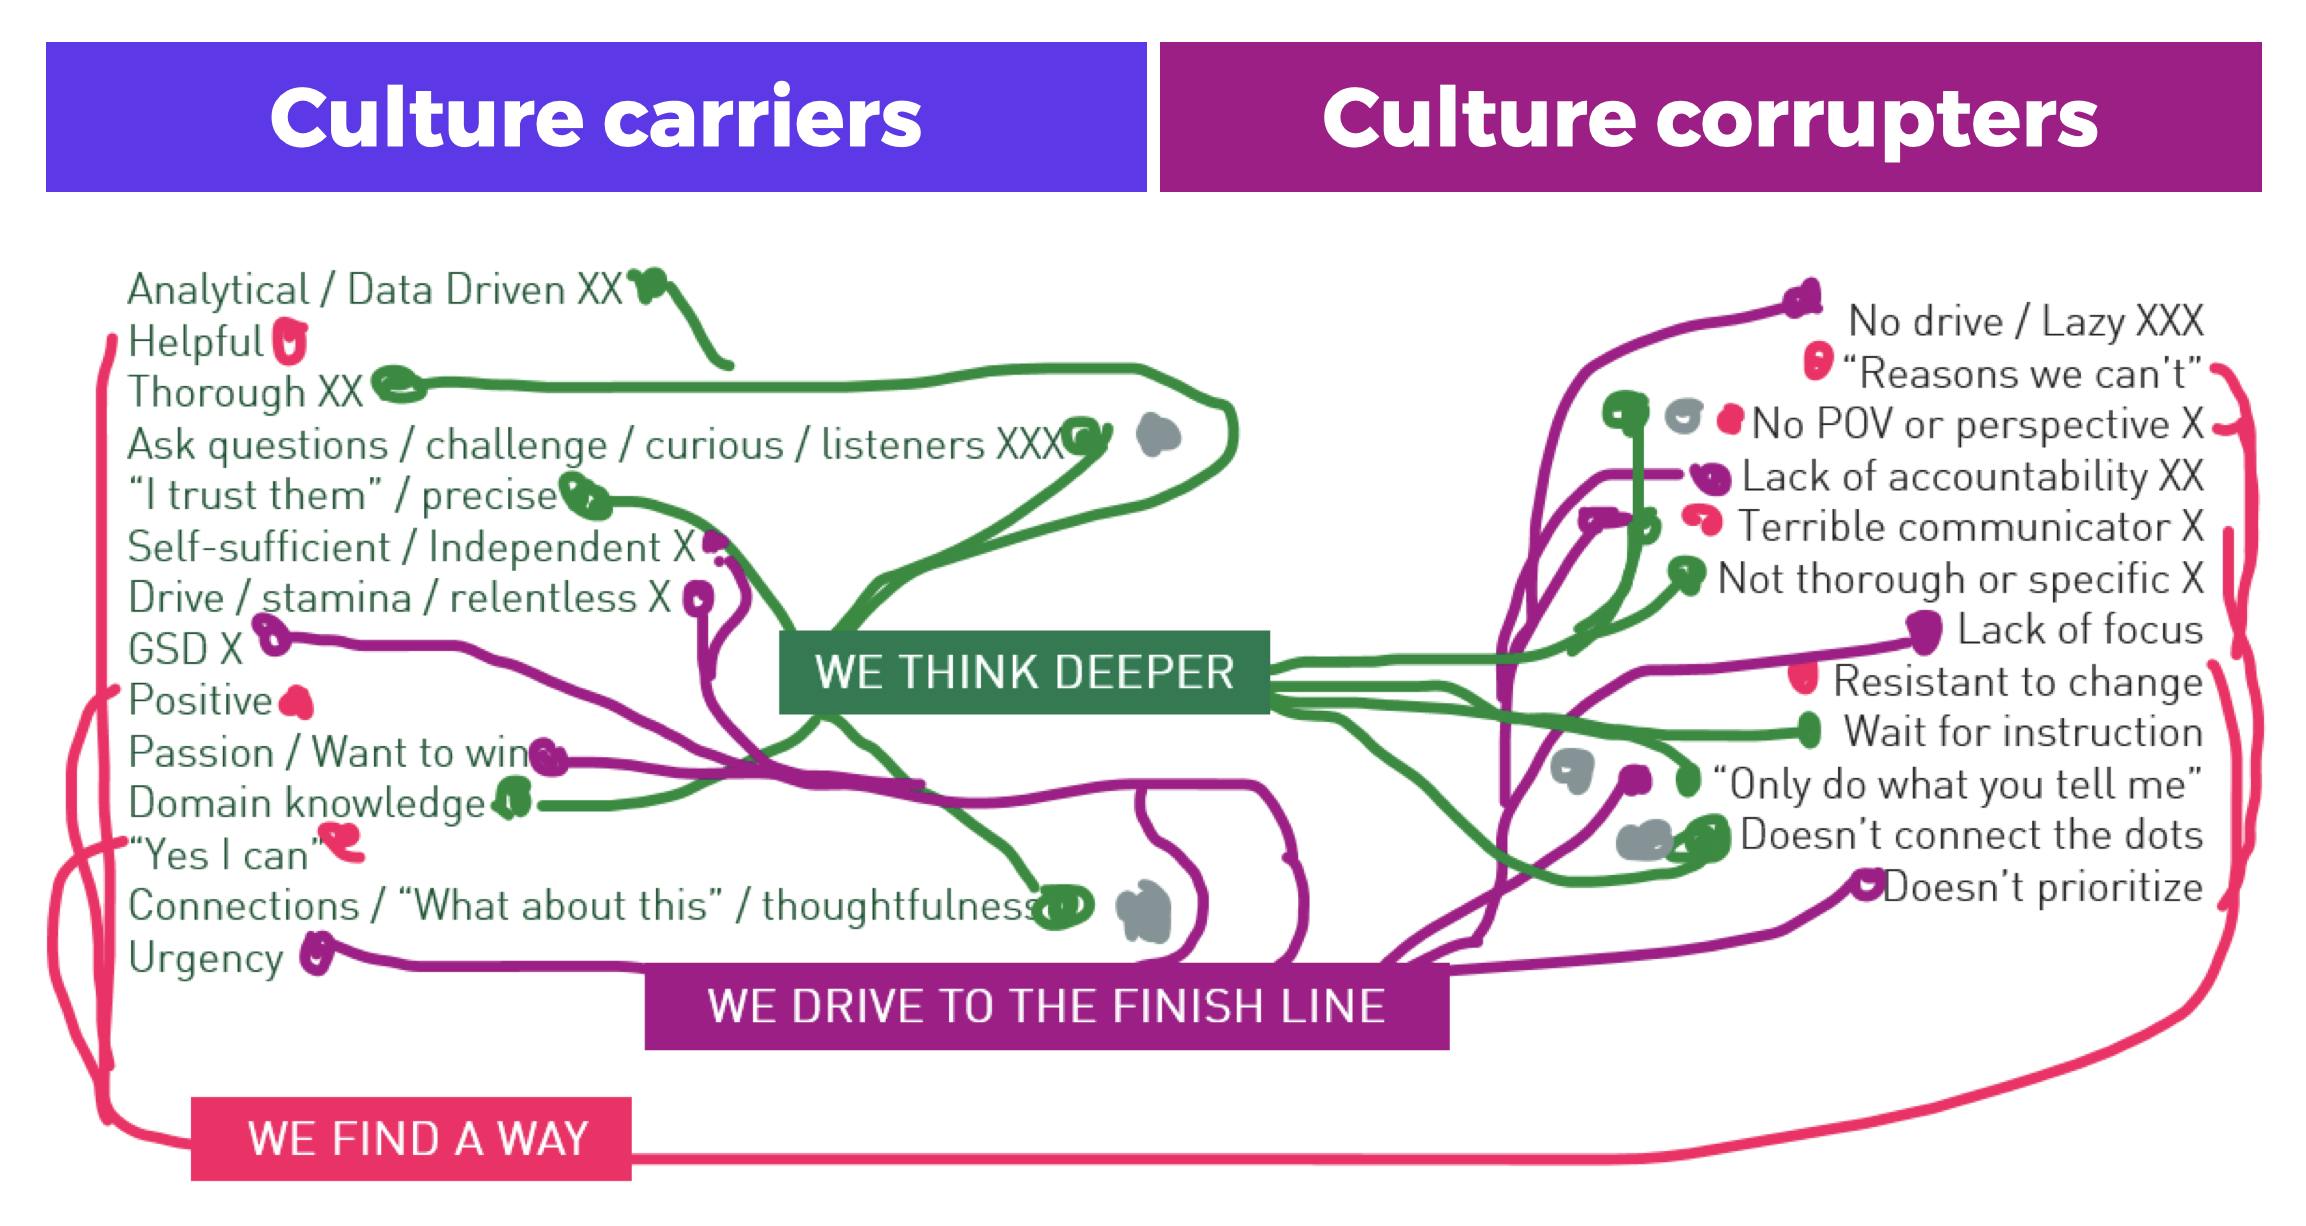 Mapping your cultural values via the behaviours that carry and corrupt your culture